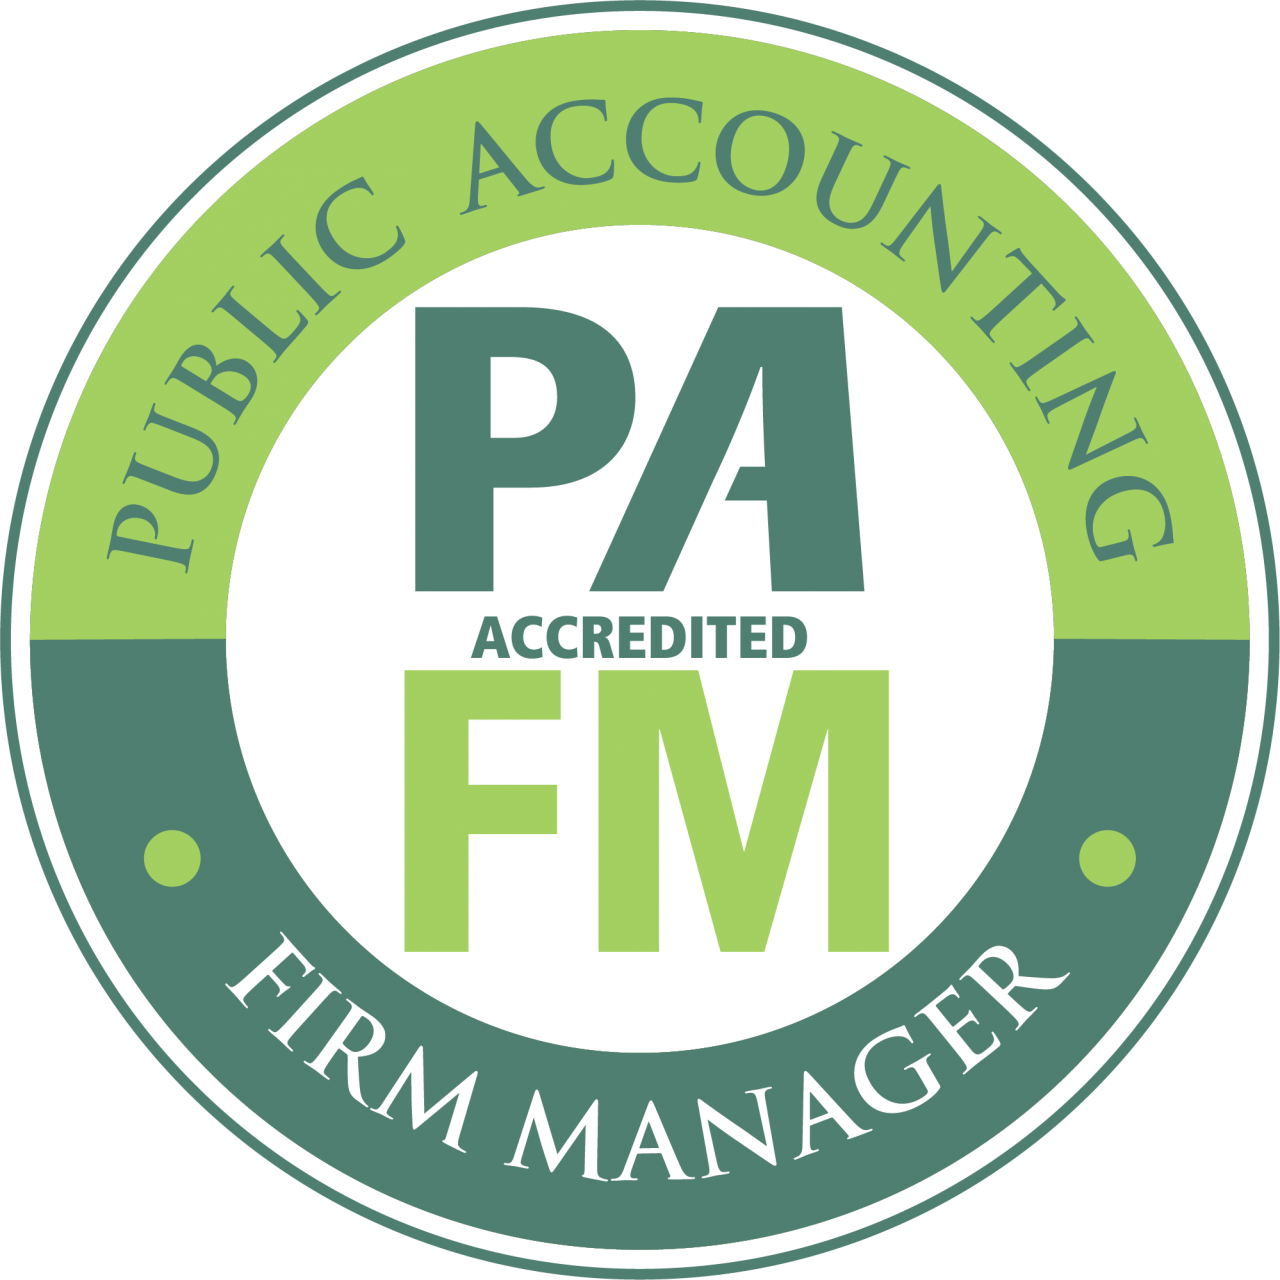 CPAFMA's Public Accounting Firm Manager Program Accepting Applications